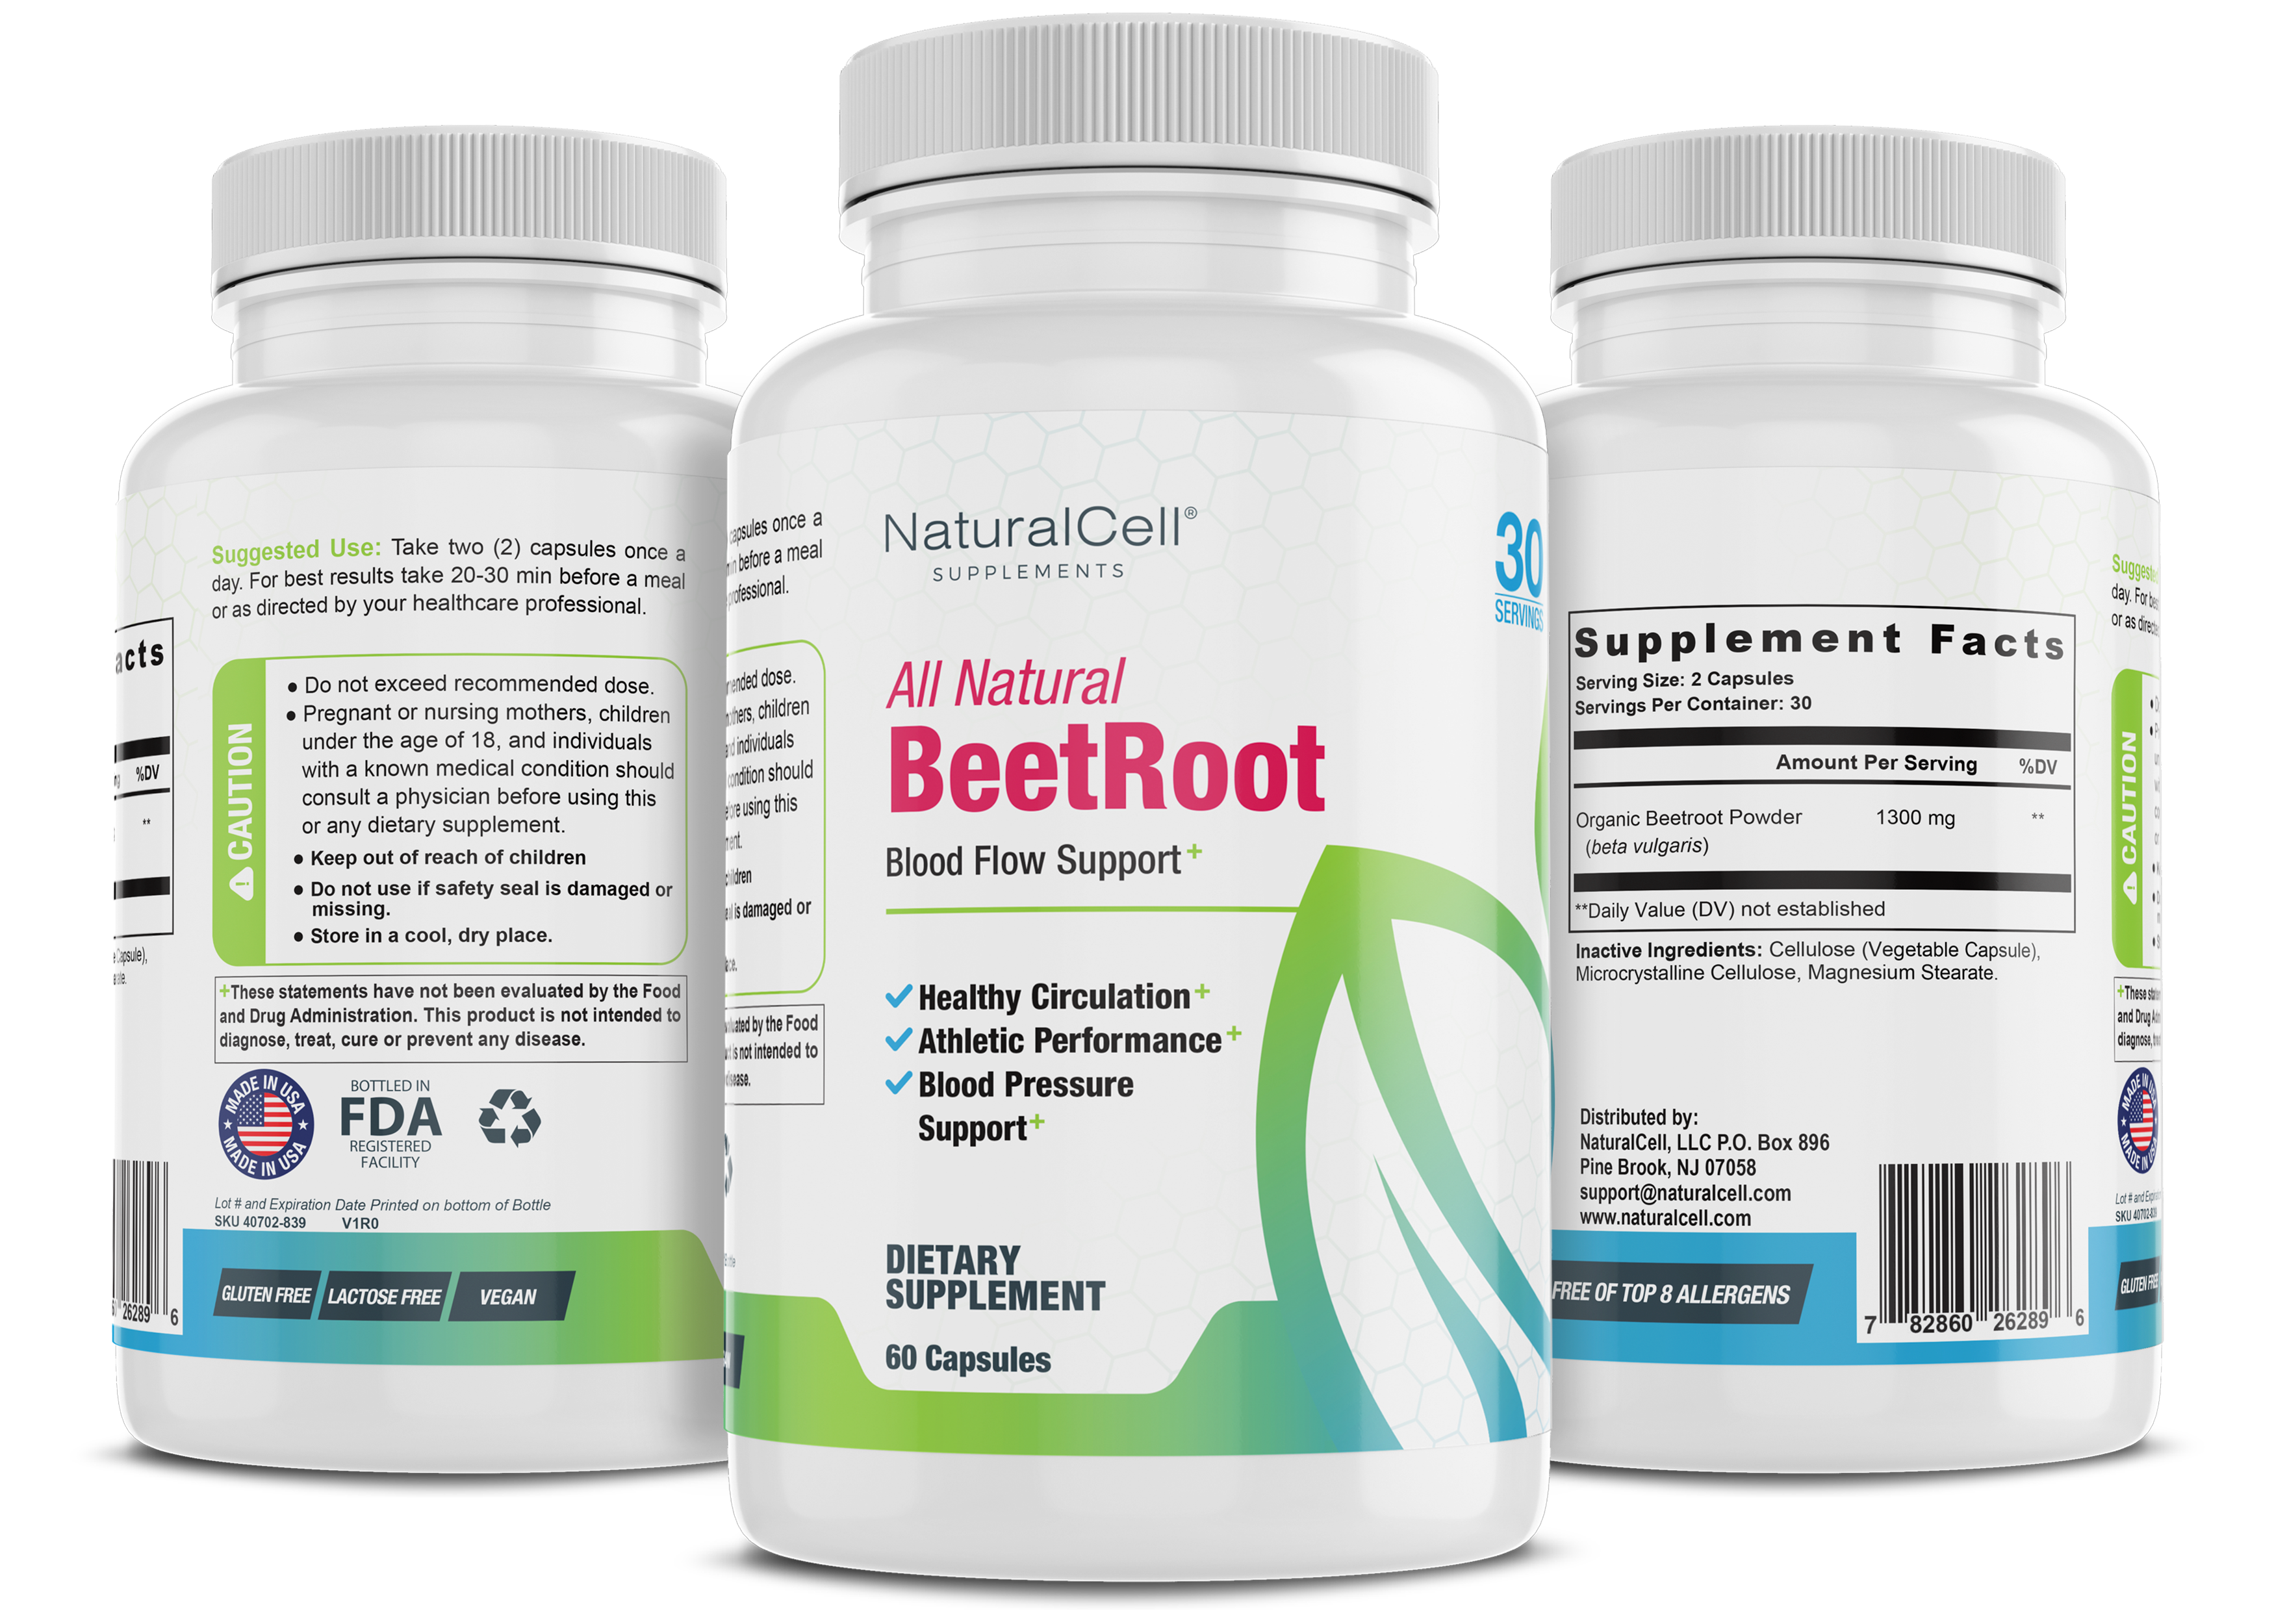 Organic Beetroot - Blood Flow Support